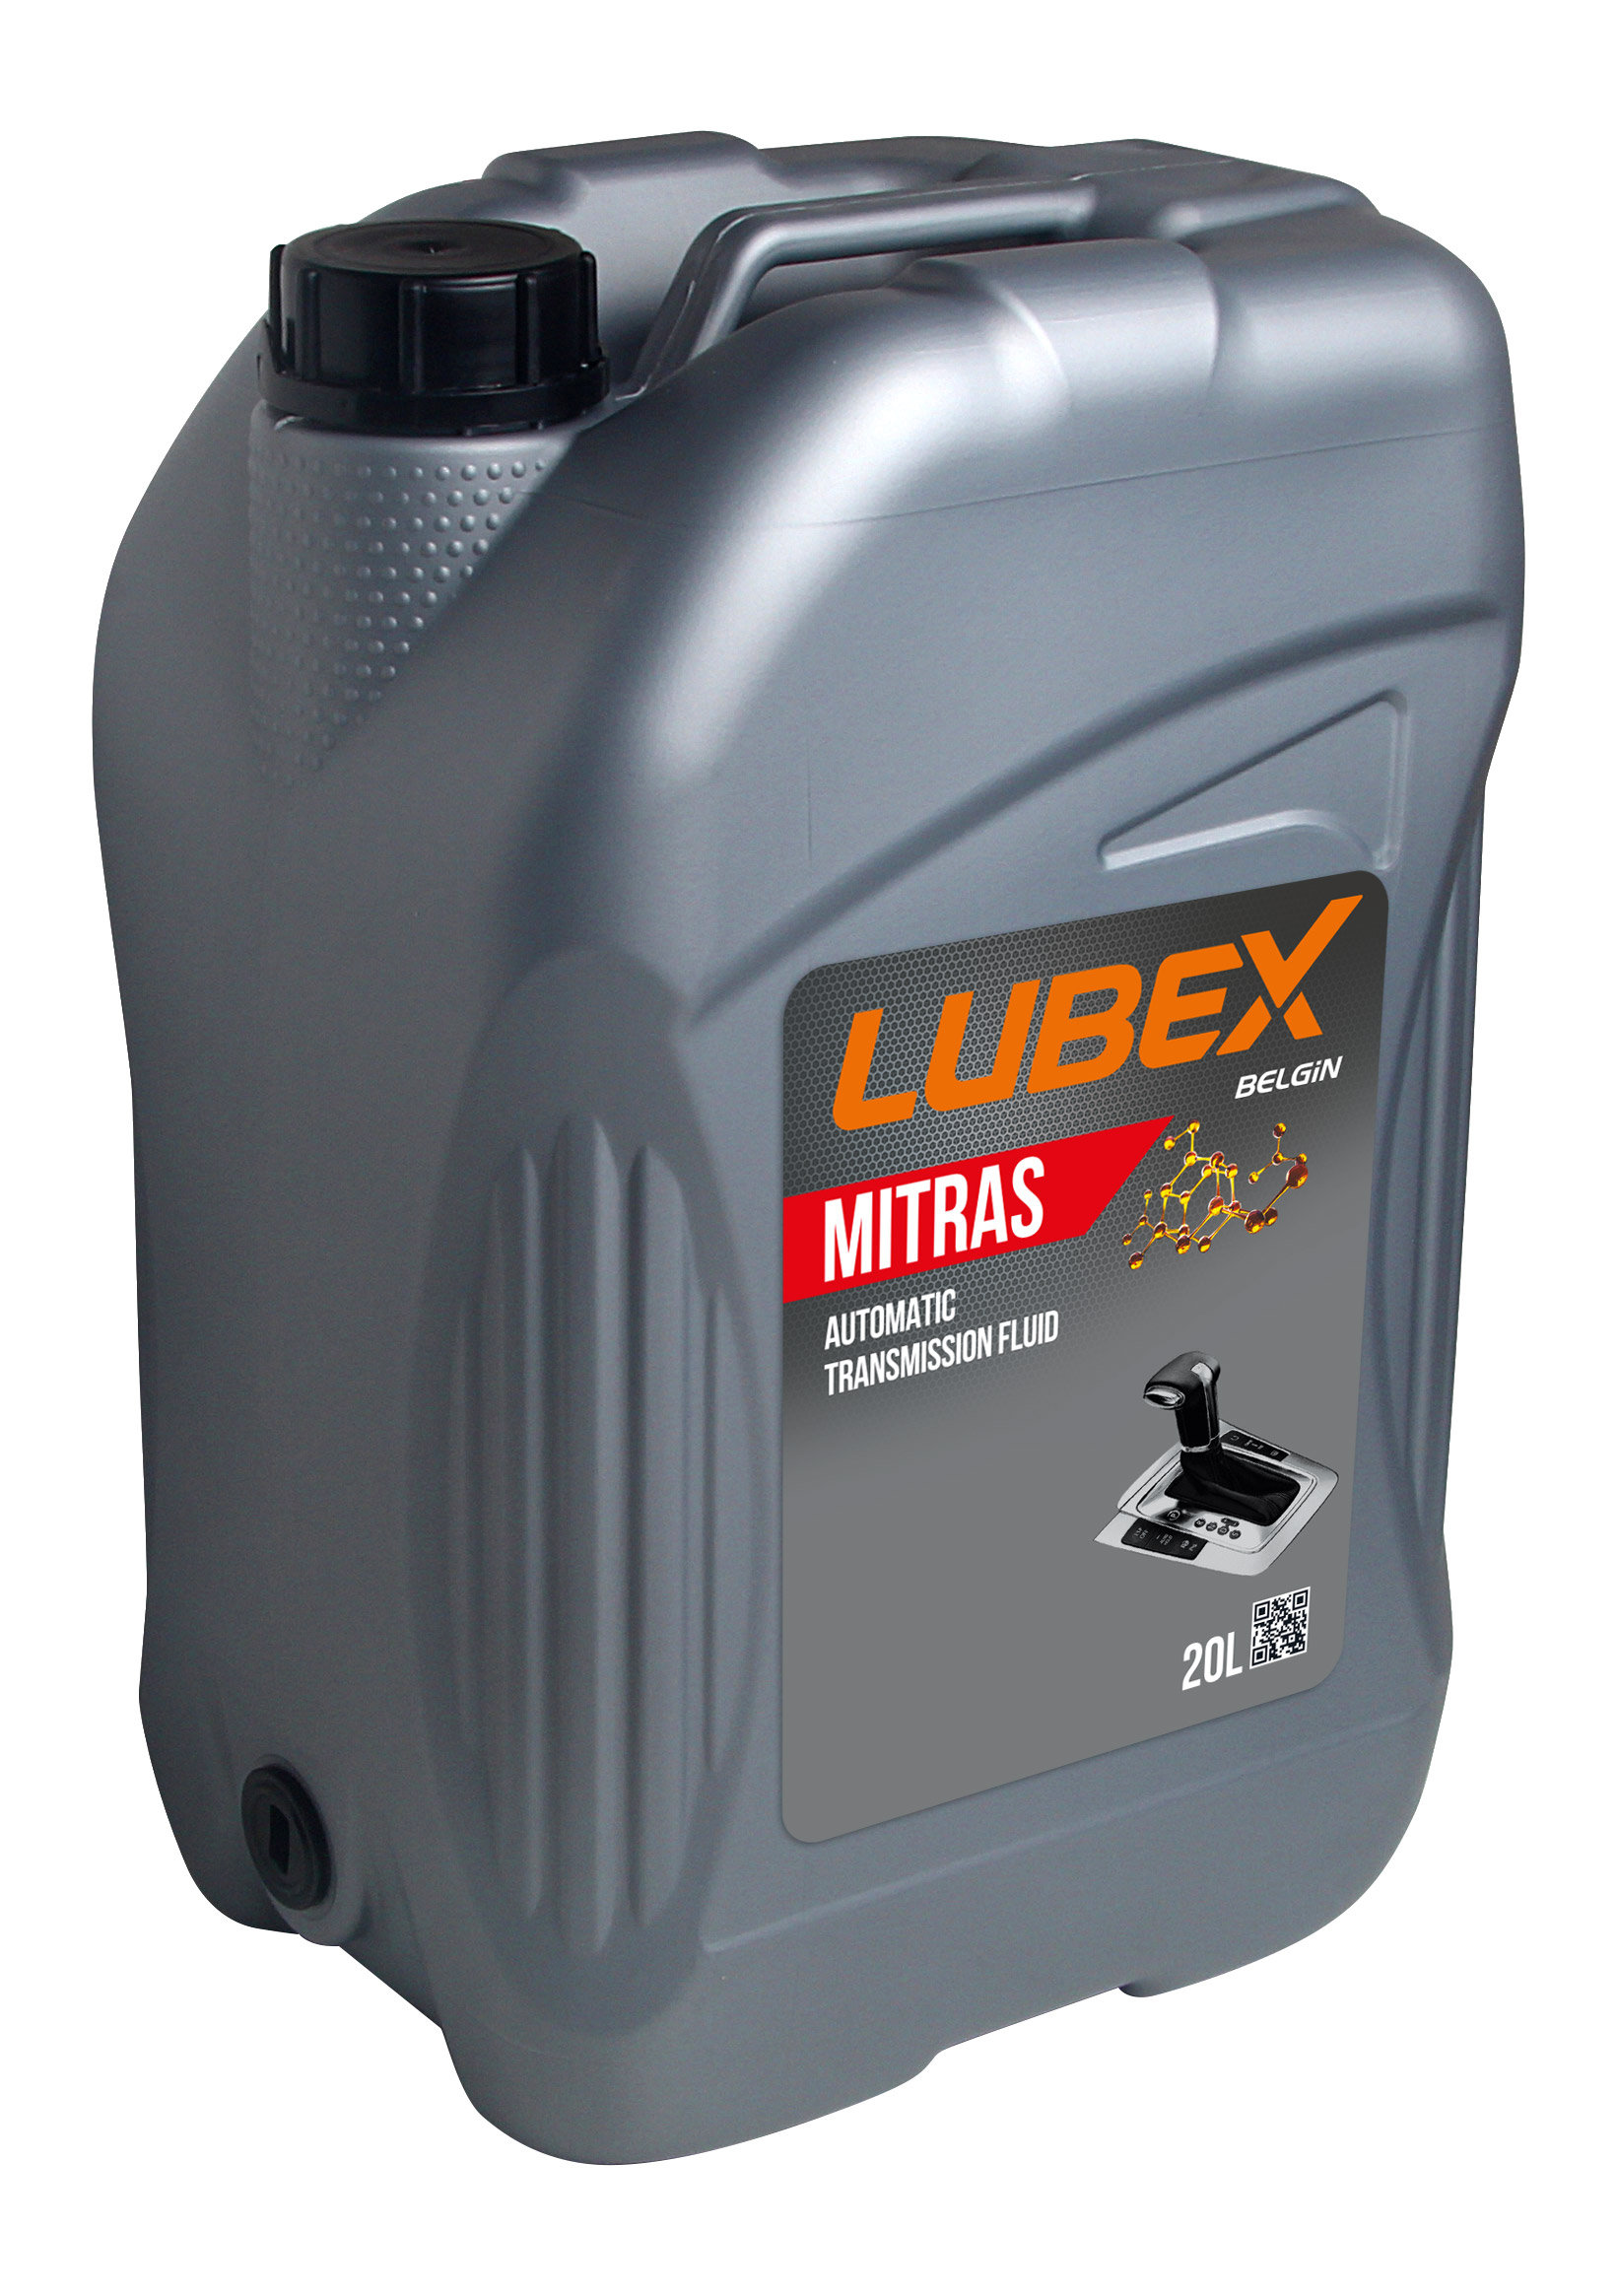 L020-0876-0020 LUBEX Синт. тр.масло д/АКПП MITRAS ATF ST DX III (20л)